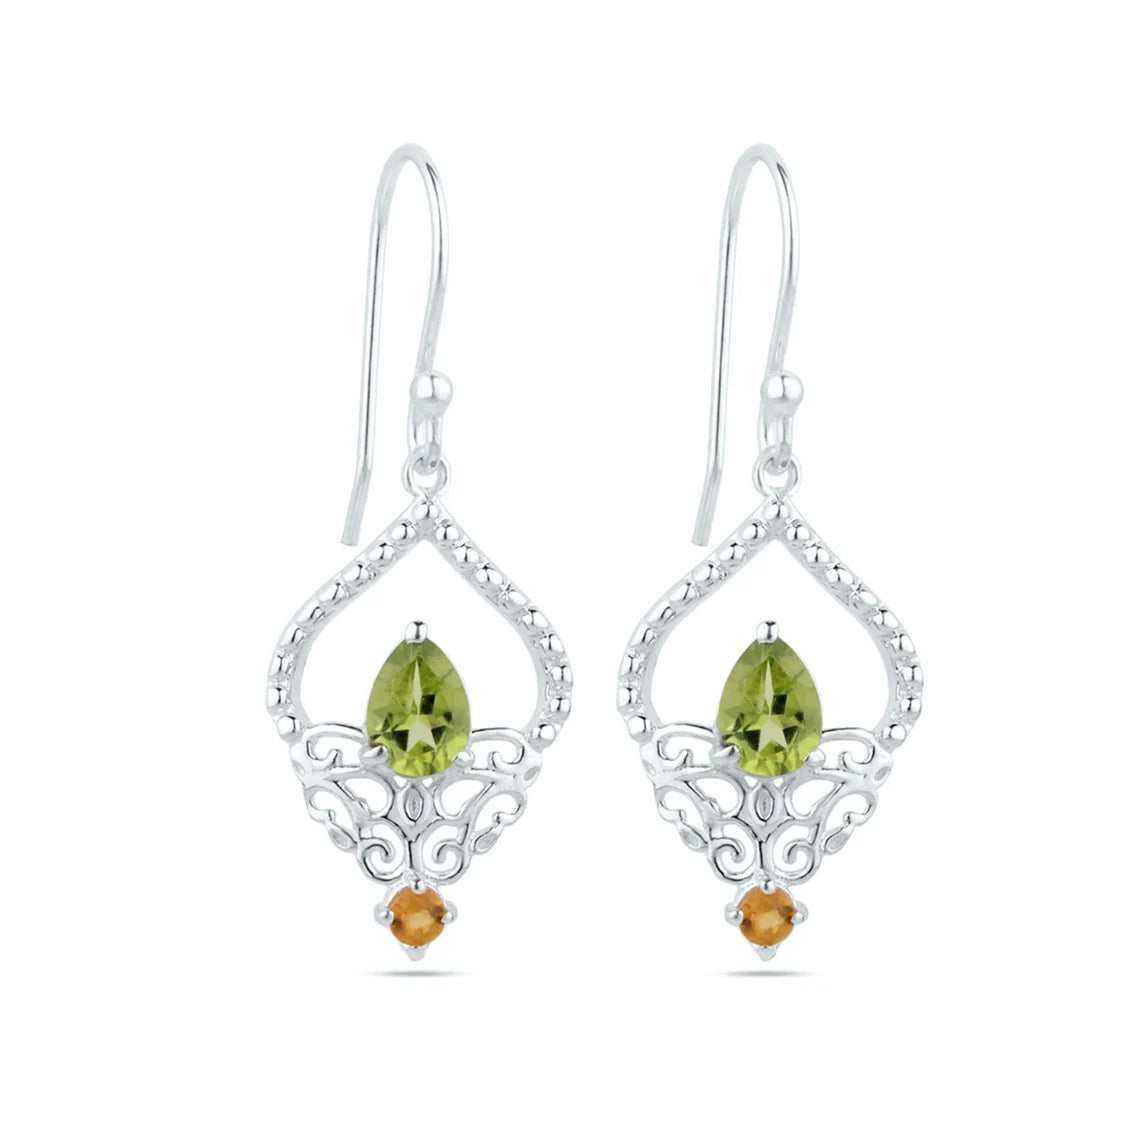 Peridot and Citrine Faceted Gemstone Earrings in Silver, gifts for her